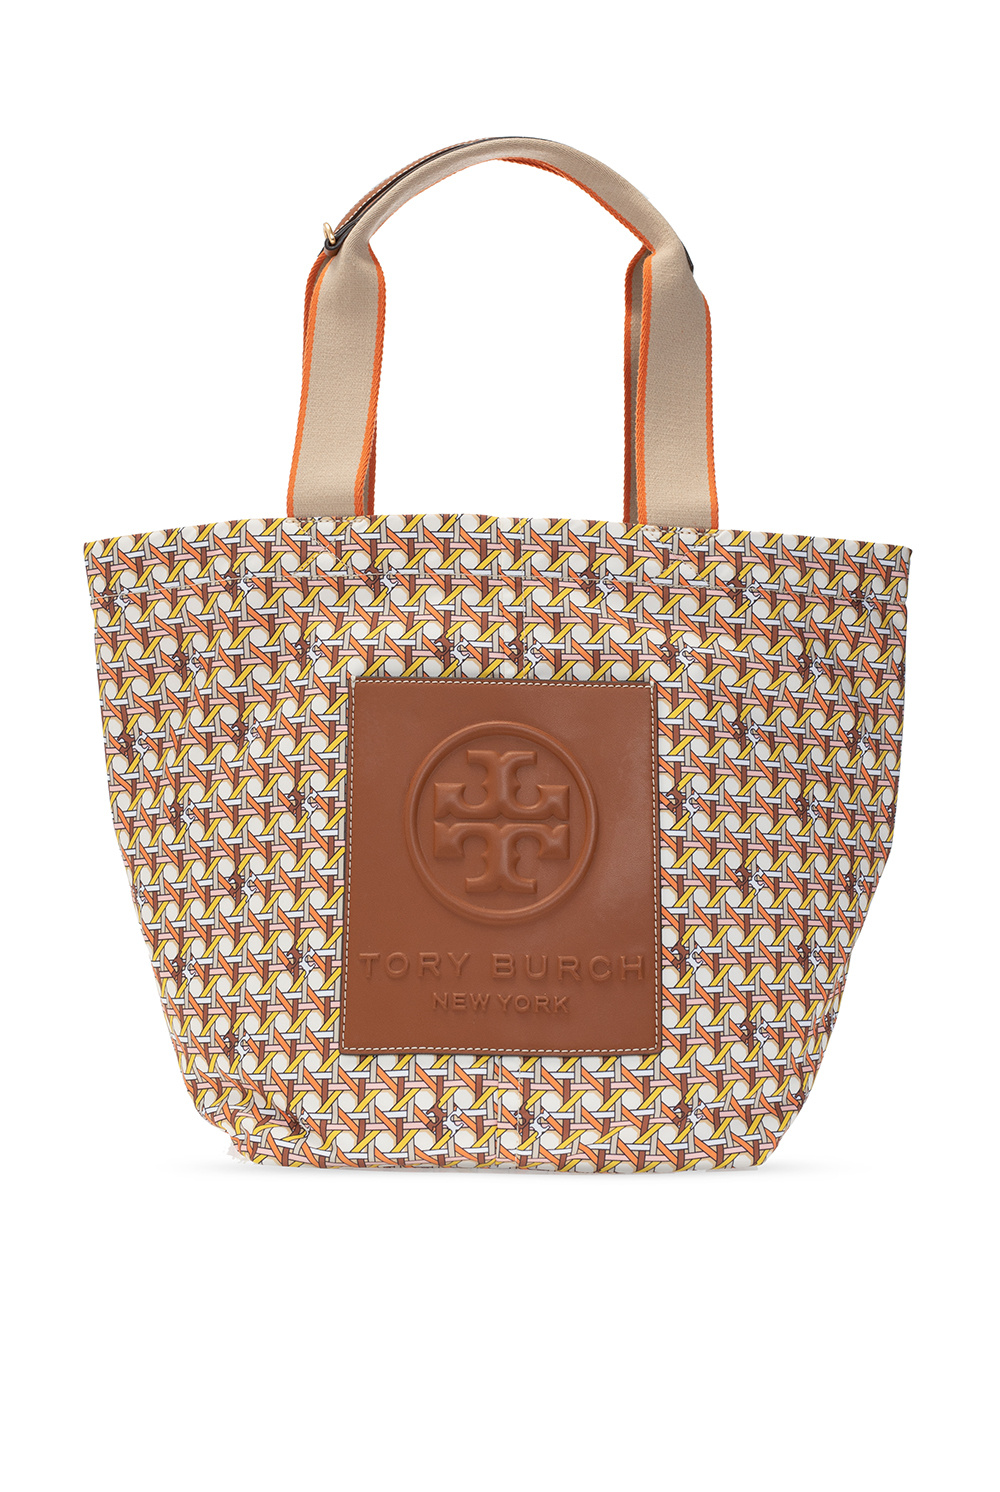 Tory Burch collaboration bag with logo | spynea backpack with logo diesel  backpack spynea | IetpShops | Women's marcelo Bags